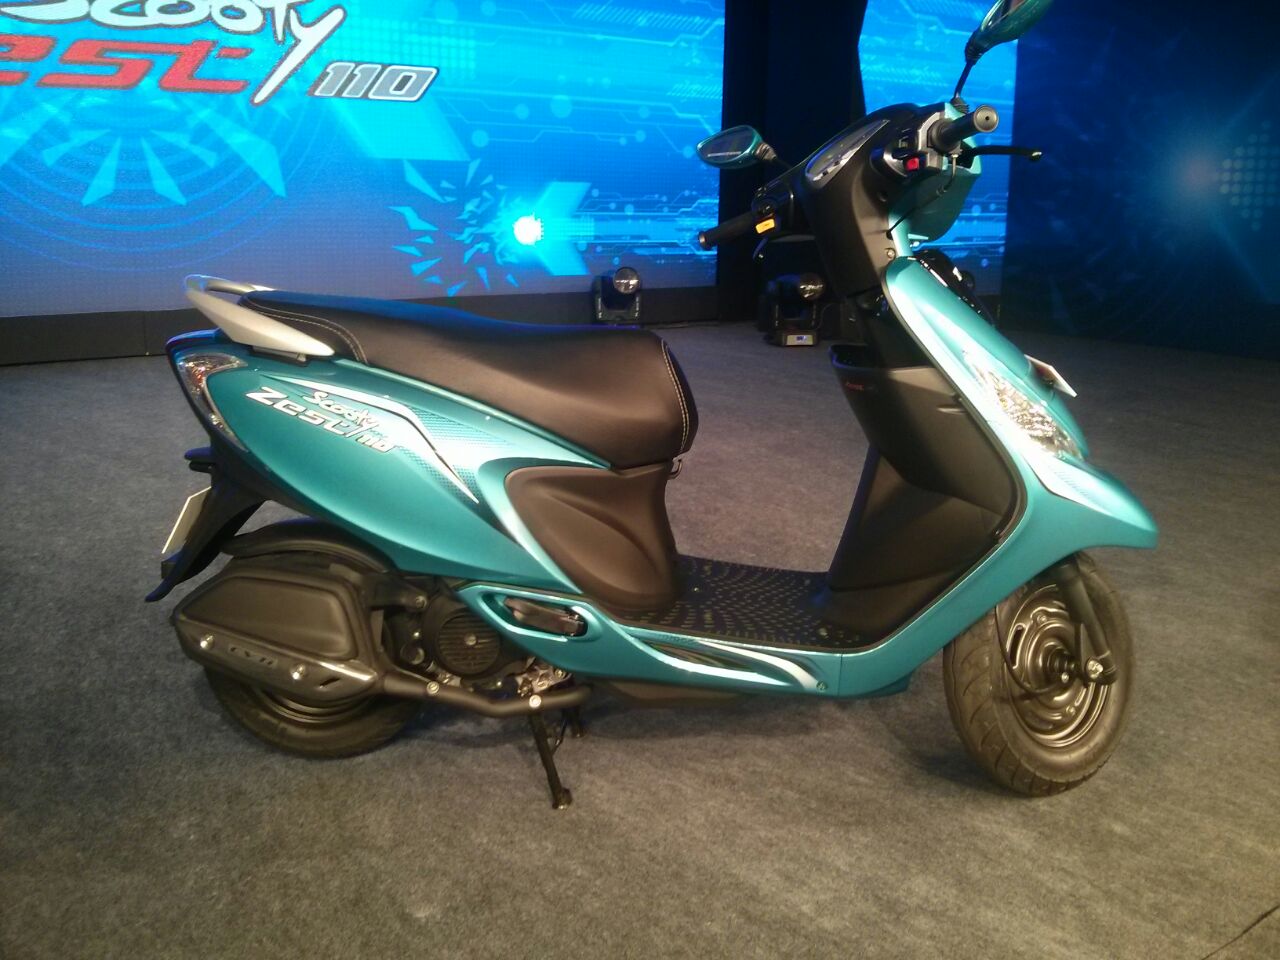 TVS Scooty Zest launched at Rs. 42,300